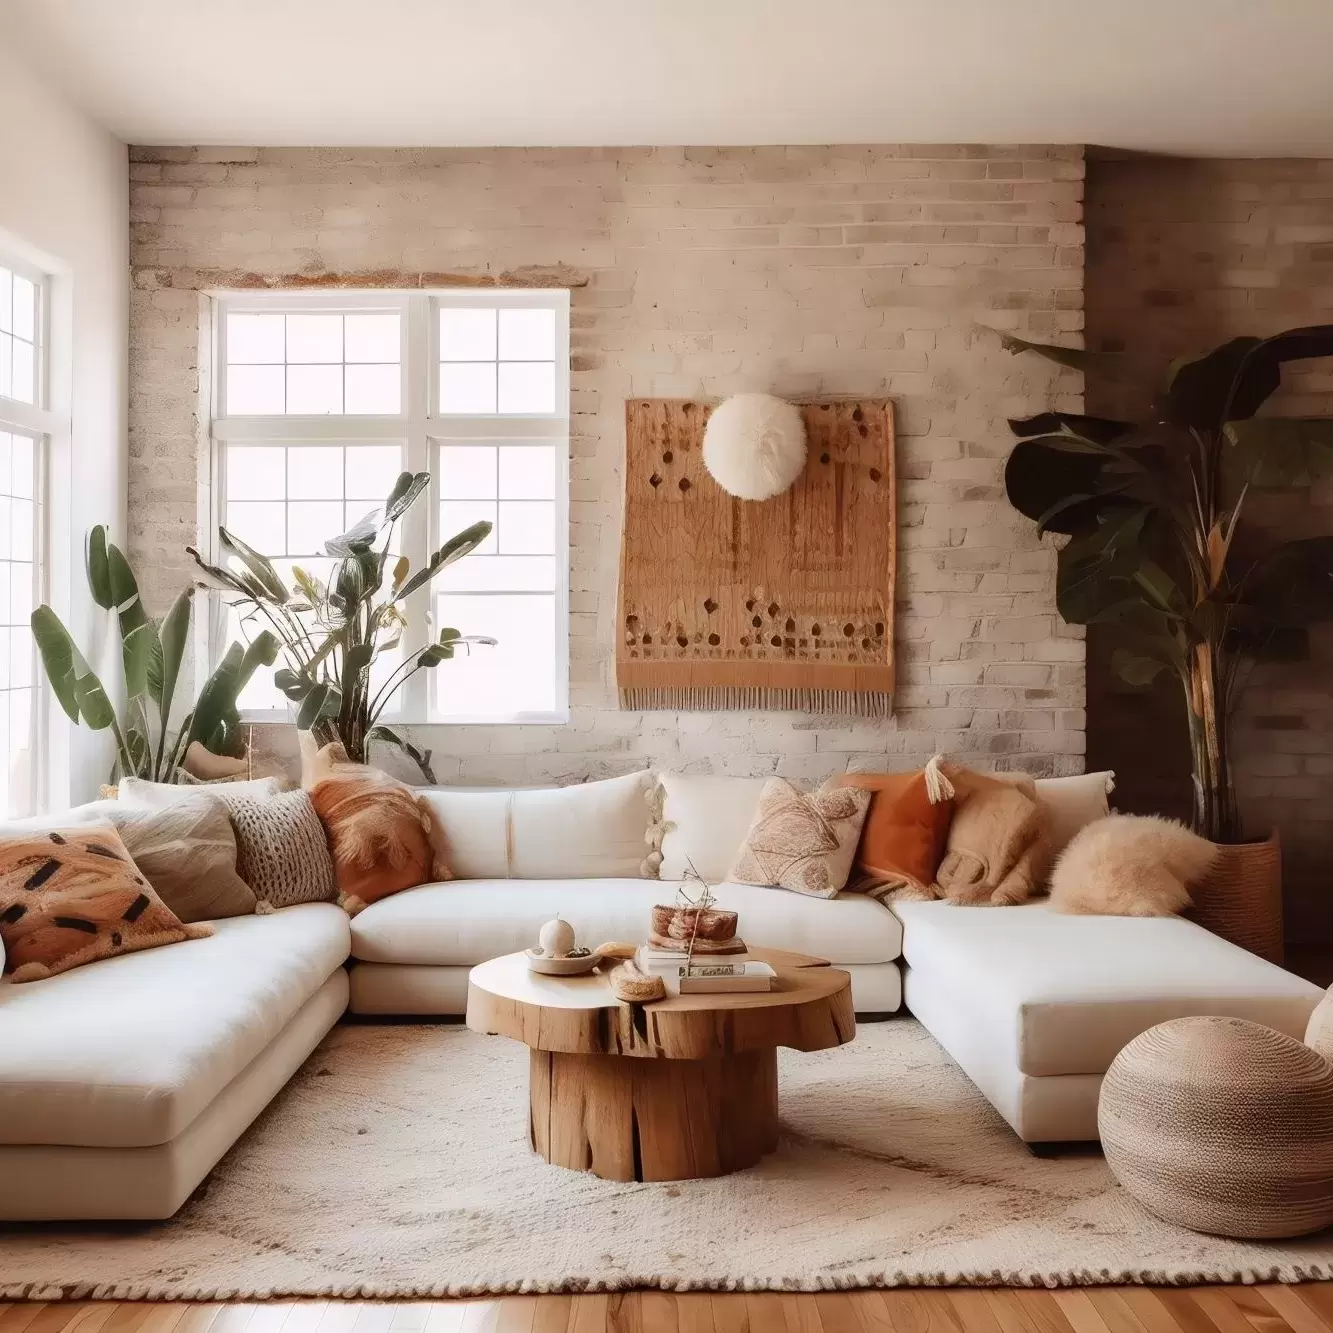 A living room with natural and neutral colors throughout the walls and decor.